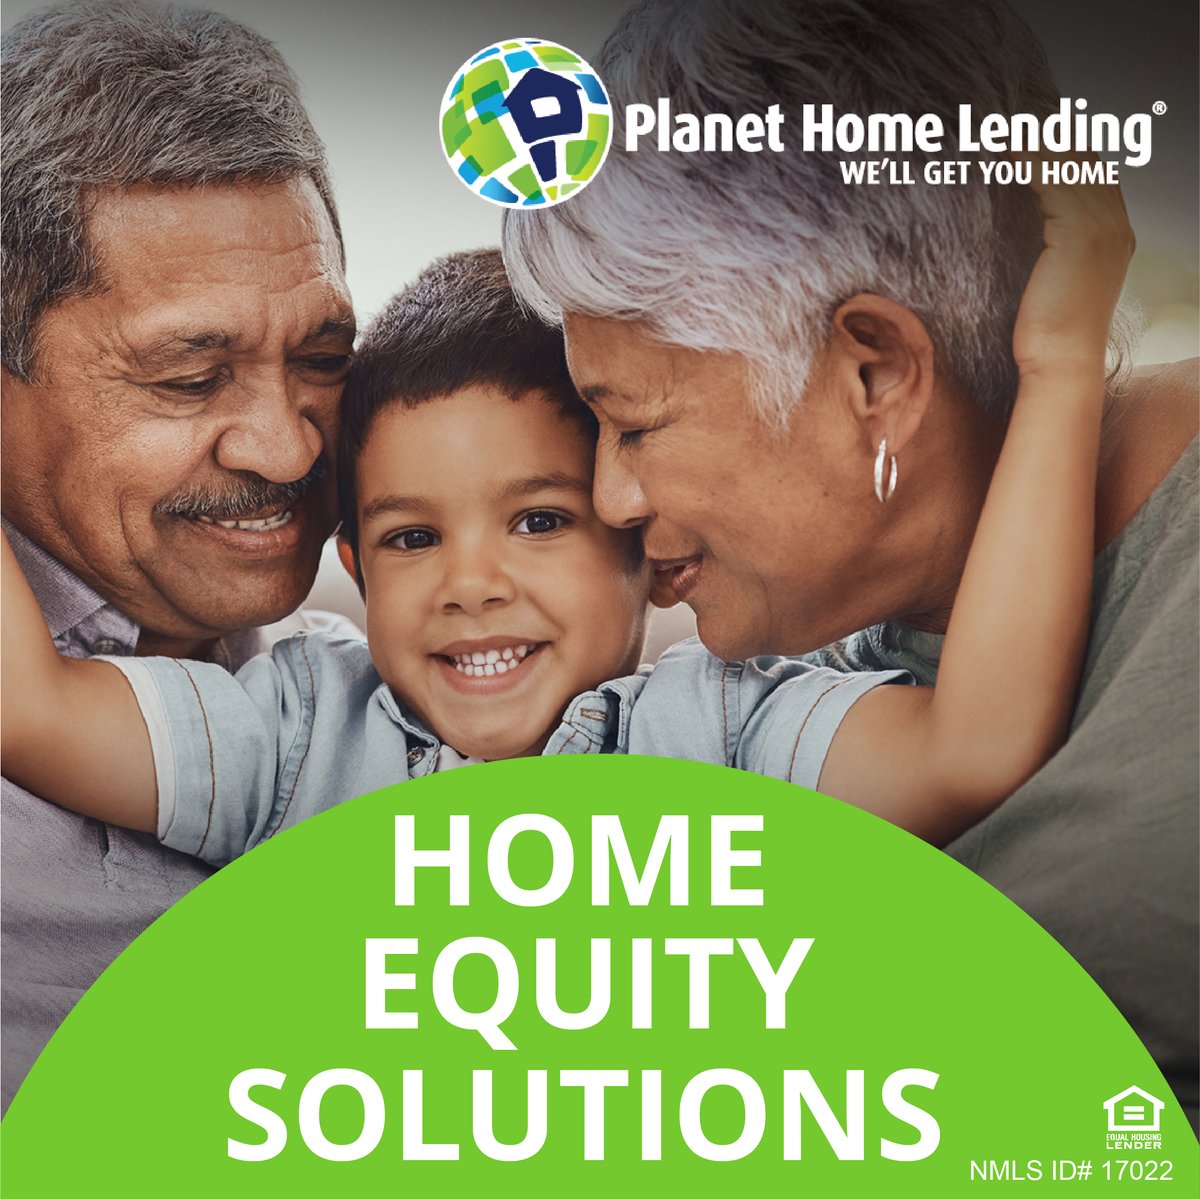 Ready to embark on a journey towards financial freedom? Your home equity can pave the way. Reach out to discuss more with Planet Home Lending. #FinancialJourney